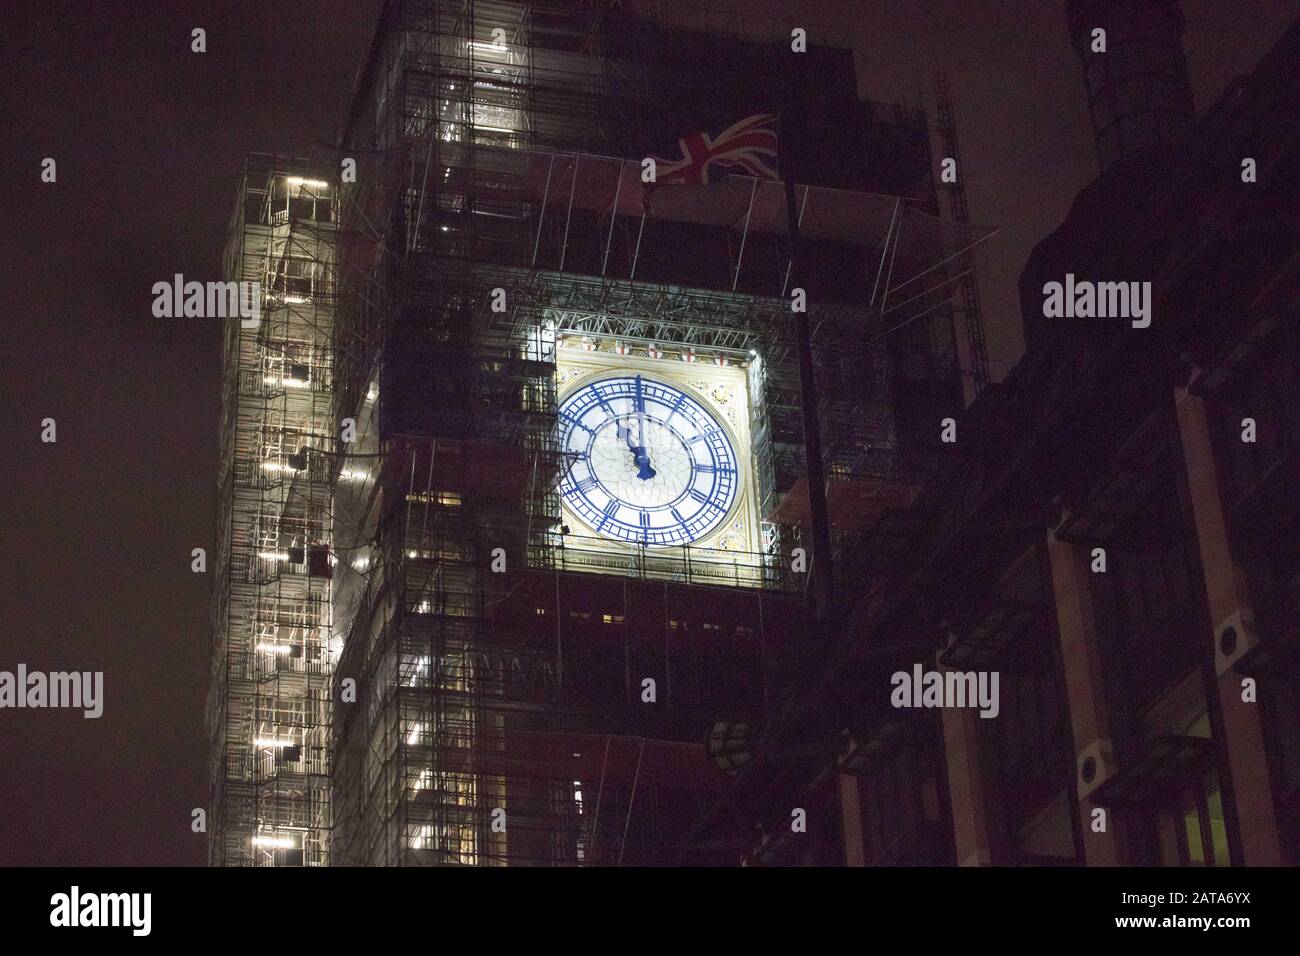 London, London, UK. 31st Jan, 2020. The Big Ben Clock shows 11 p.m. (2300 GMT), in London, Britain on Jan. 31, 2020. Britain officially left the European Union (EU) at 11 p.m. (2300 GMT) Friday, putting an end to its 47-year-long membership of the world's largest trading bloc. Credit: Tim Ireland/Xinhua/Alamy Live News Stock Photo